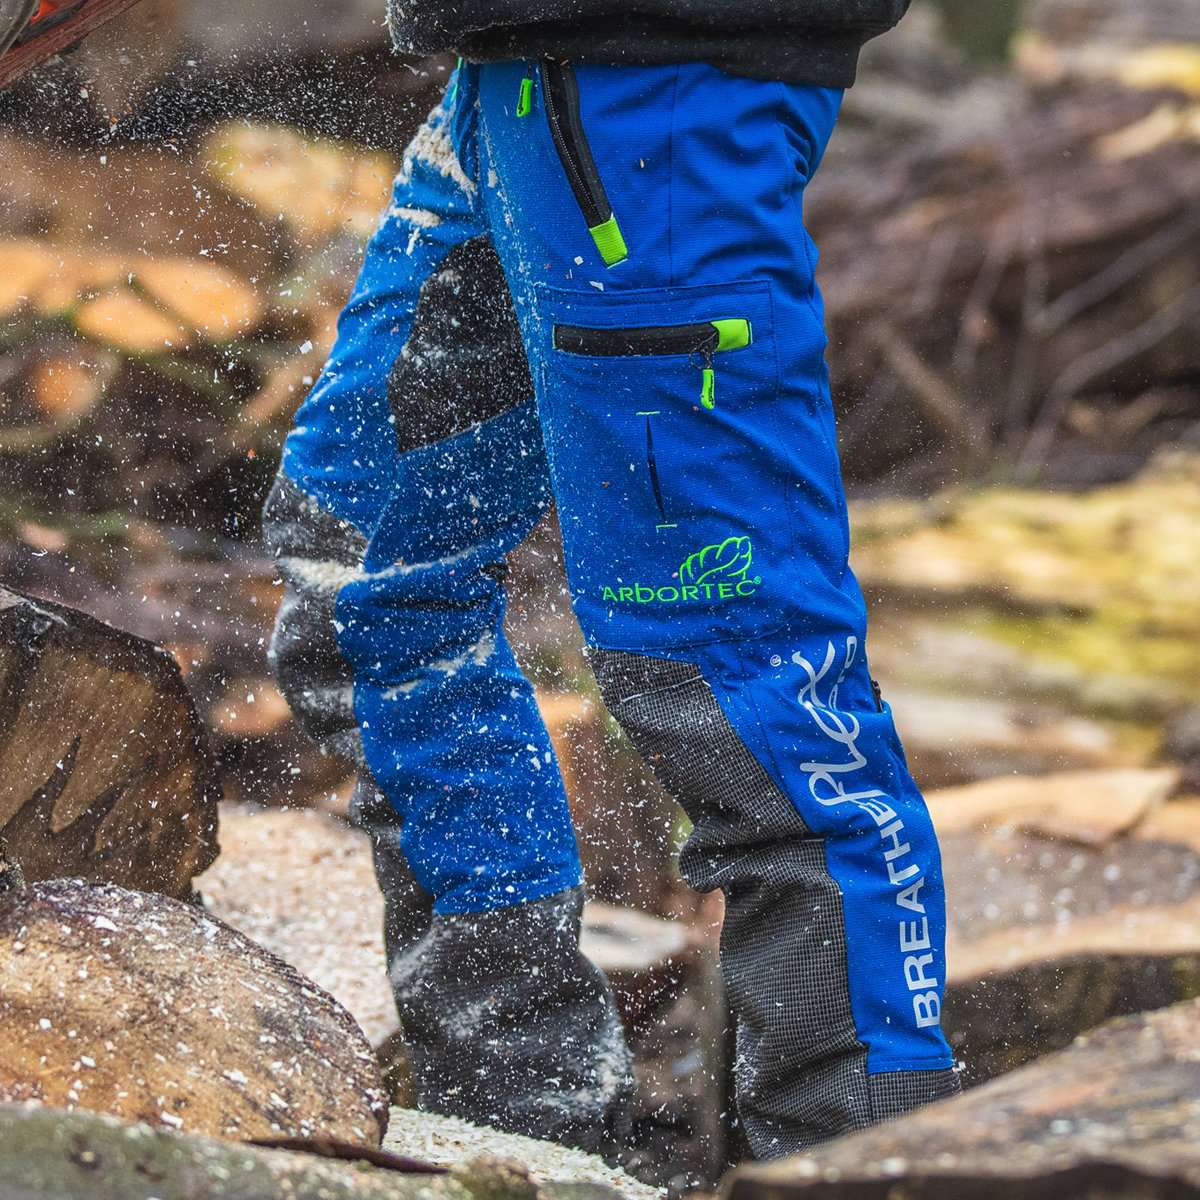 AT4060 Breatheflex Pro Type A Class 1 Chainsaw Trousers - Blue - Arbortec Forestwear